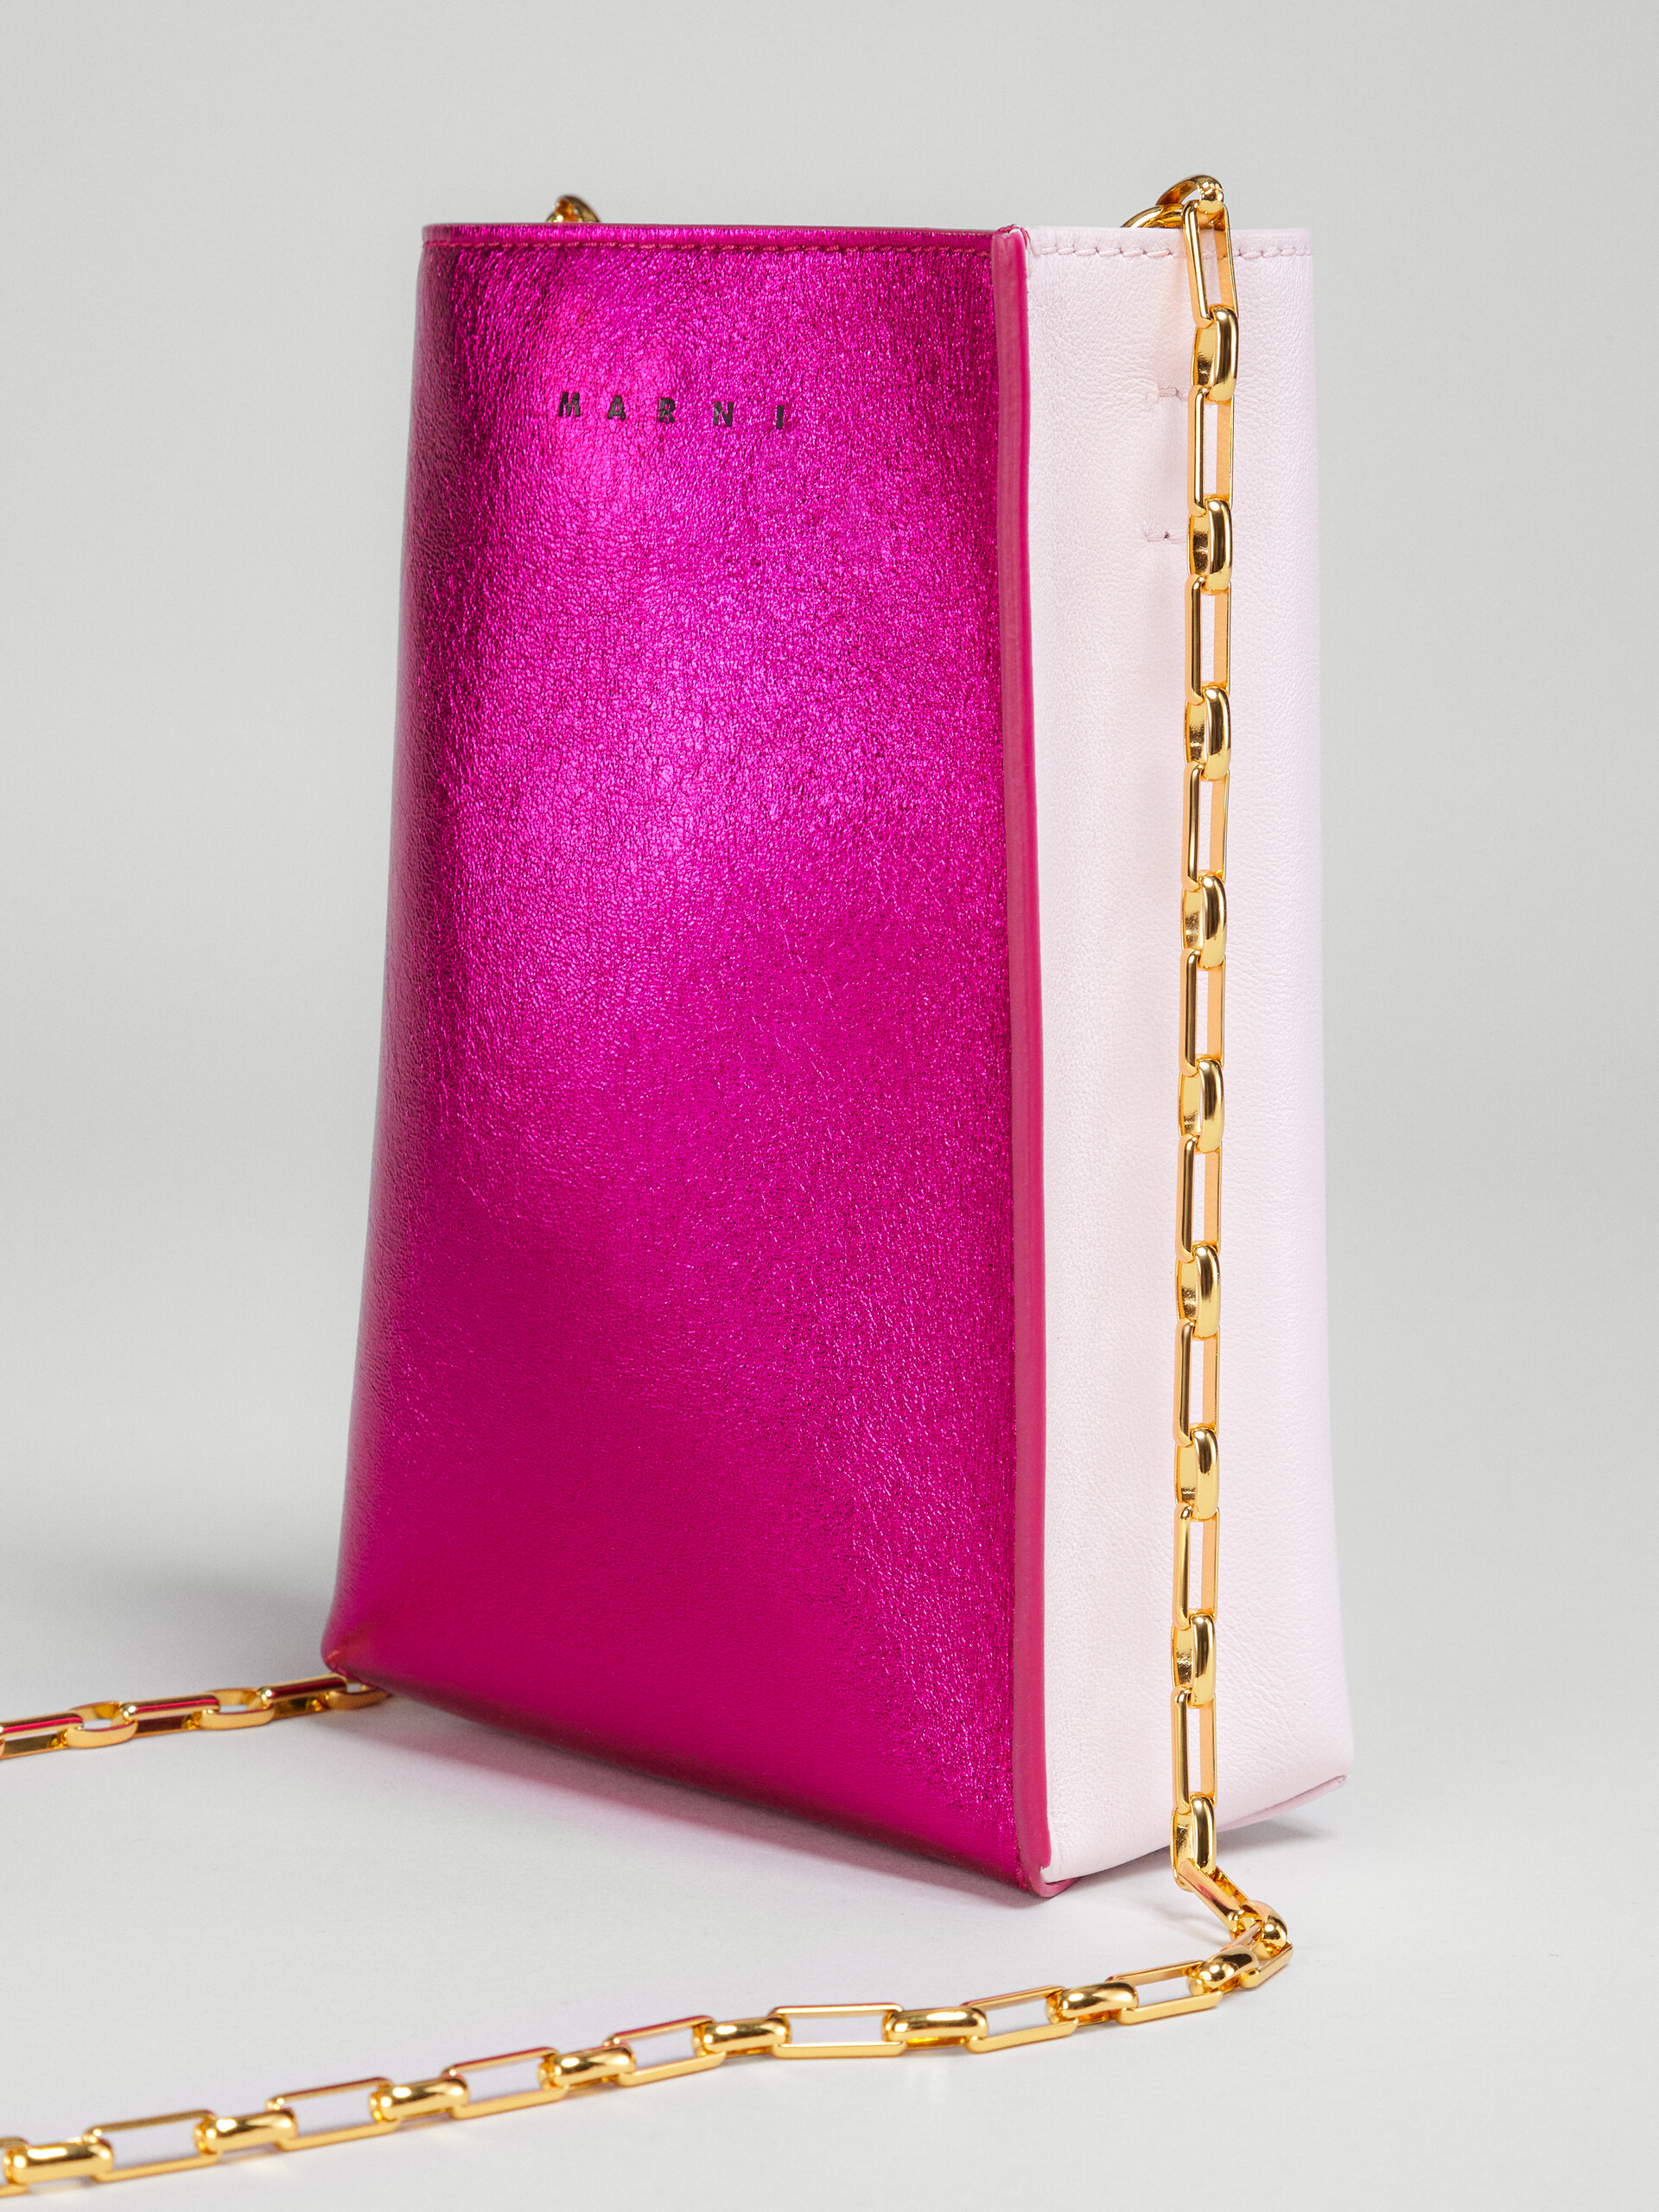 MUSEO SOFT nano bag in fuchsia and pink metallic leather - Shoulder Bags - Image 3